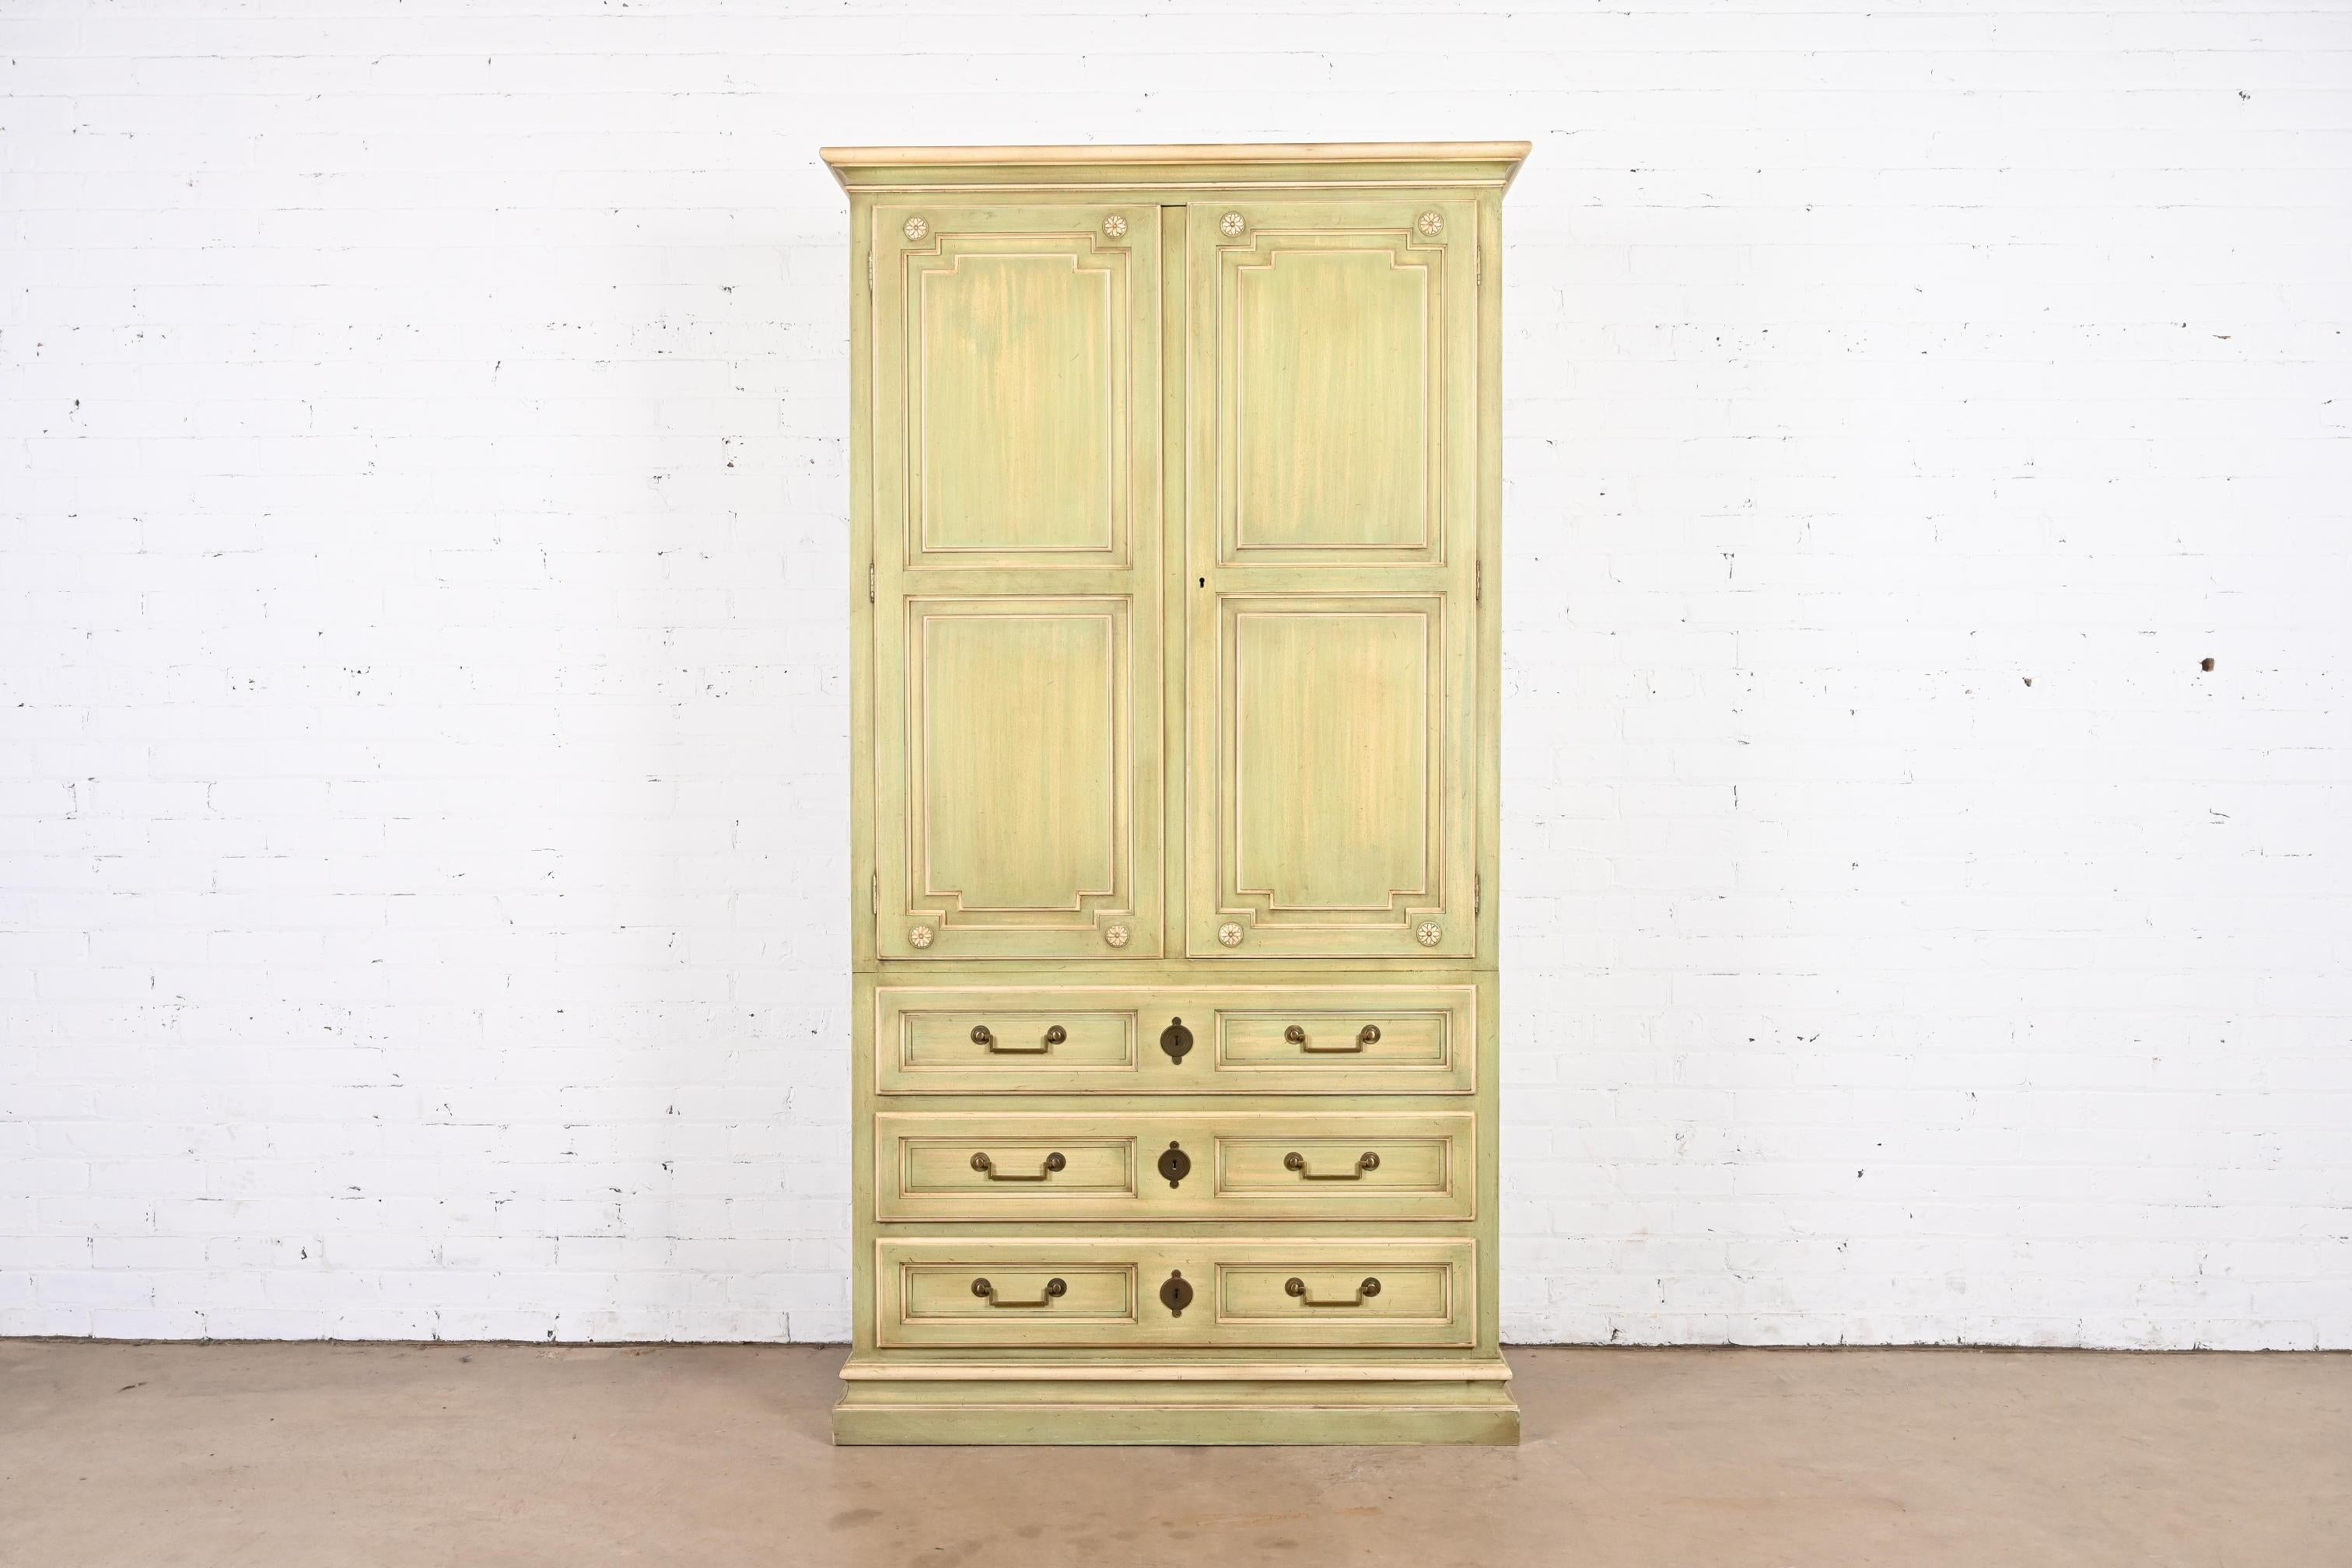 A gorgeous French Regency Louis XVI or Swedish Gustavian style armoire dresser or linen press

By Baker Furniture, 